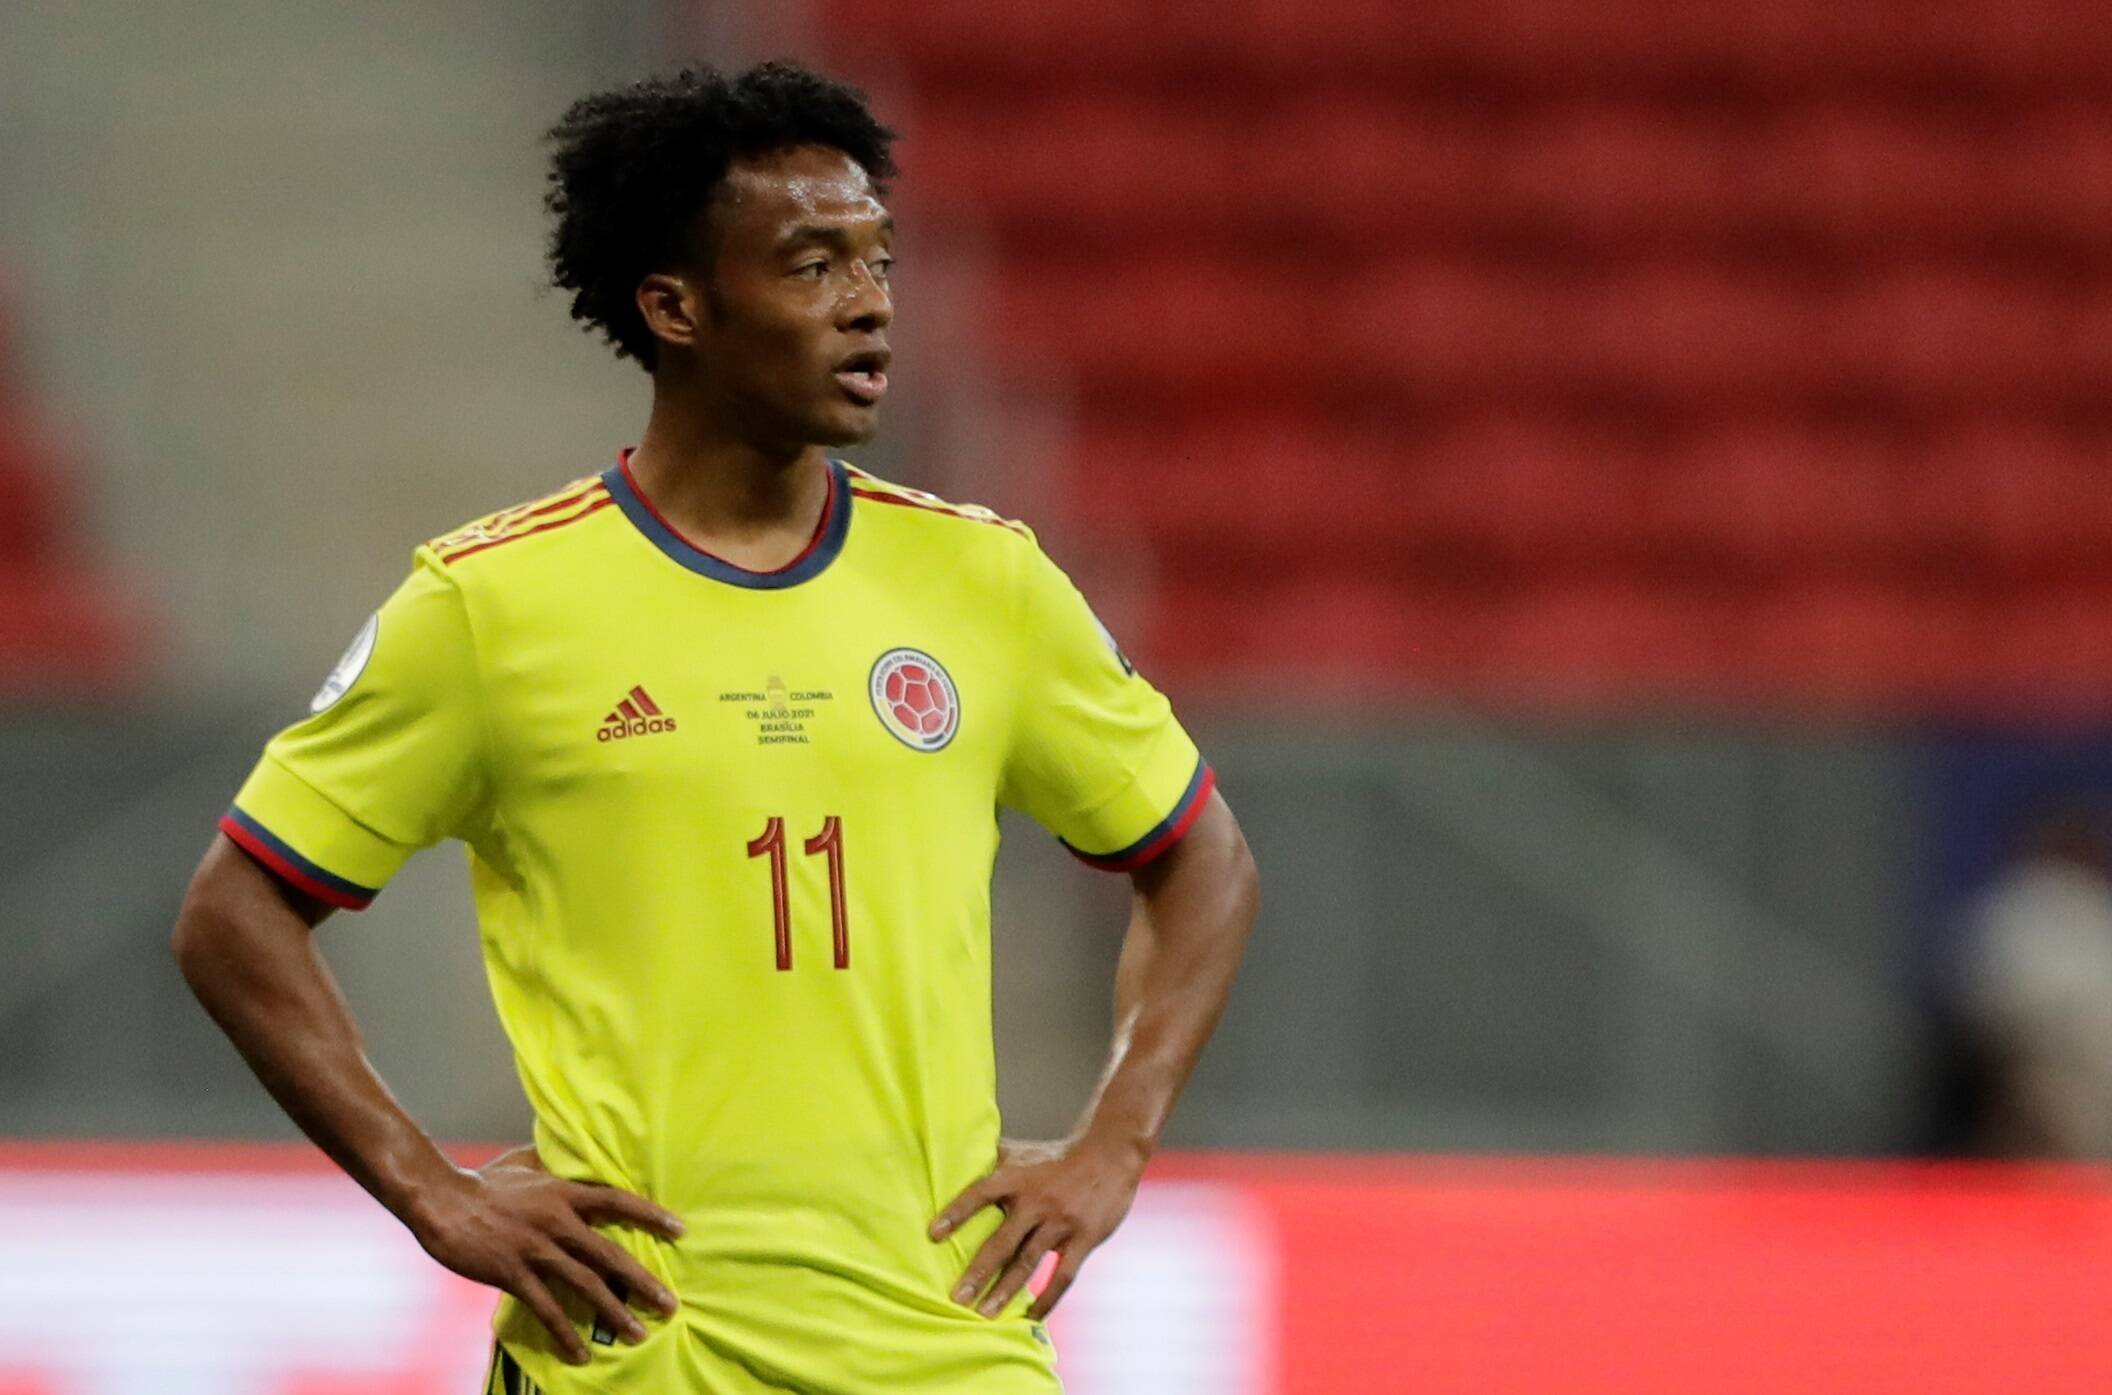 (Image) Juan Cuadrado Seen In The Stands For Chelsea v Man City Ahead